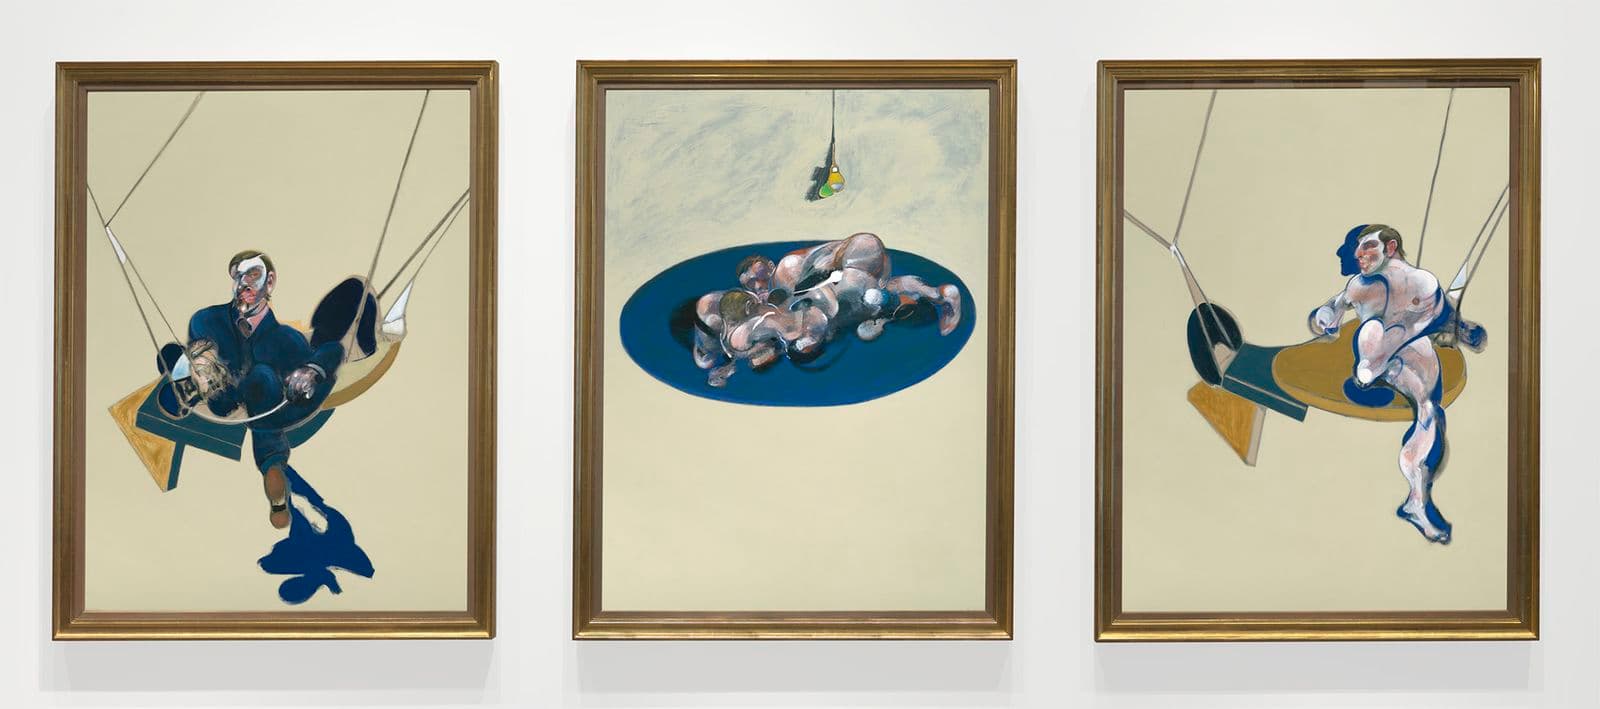 A set of three paintings with abstract human figures in hammocks.